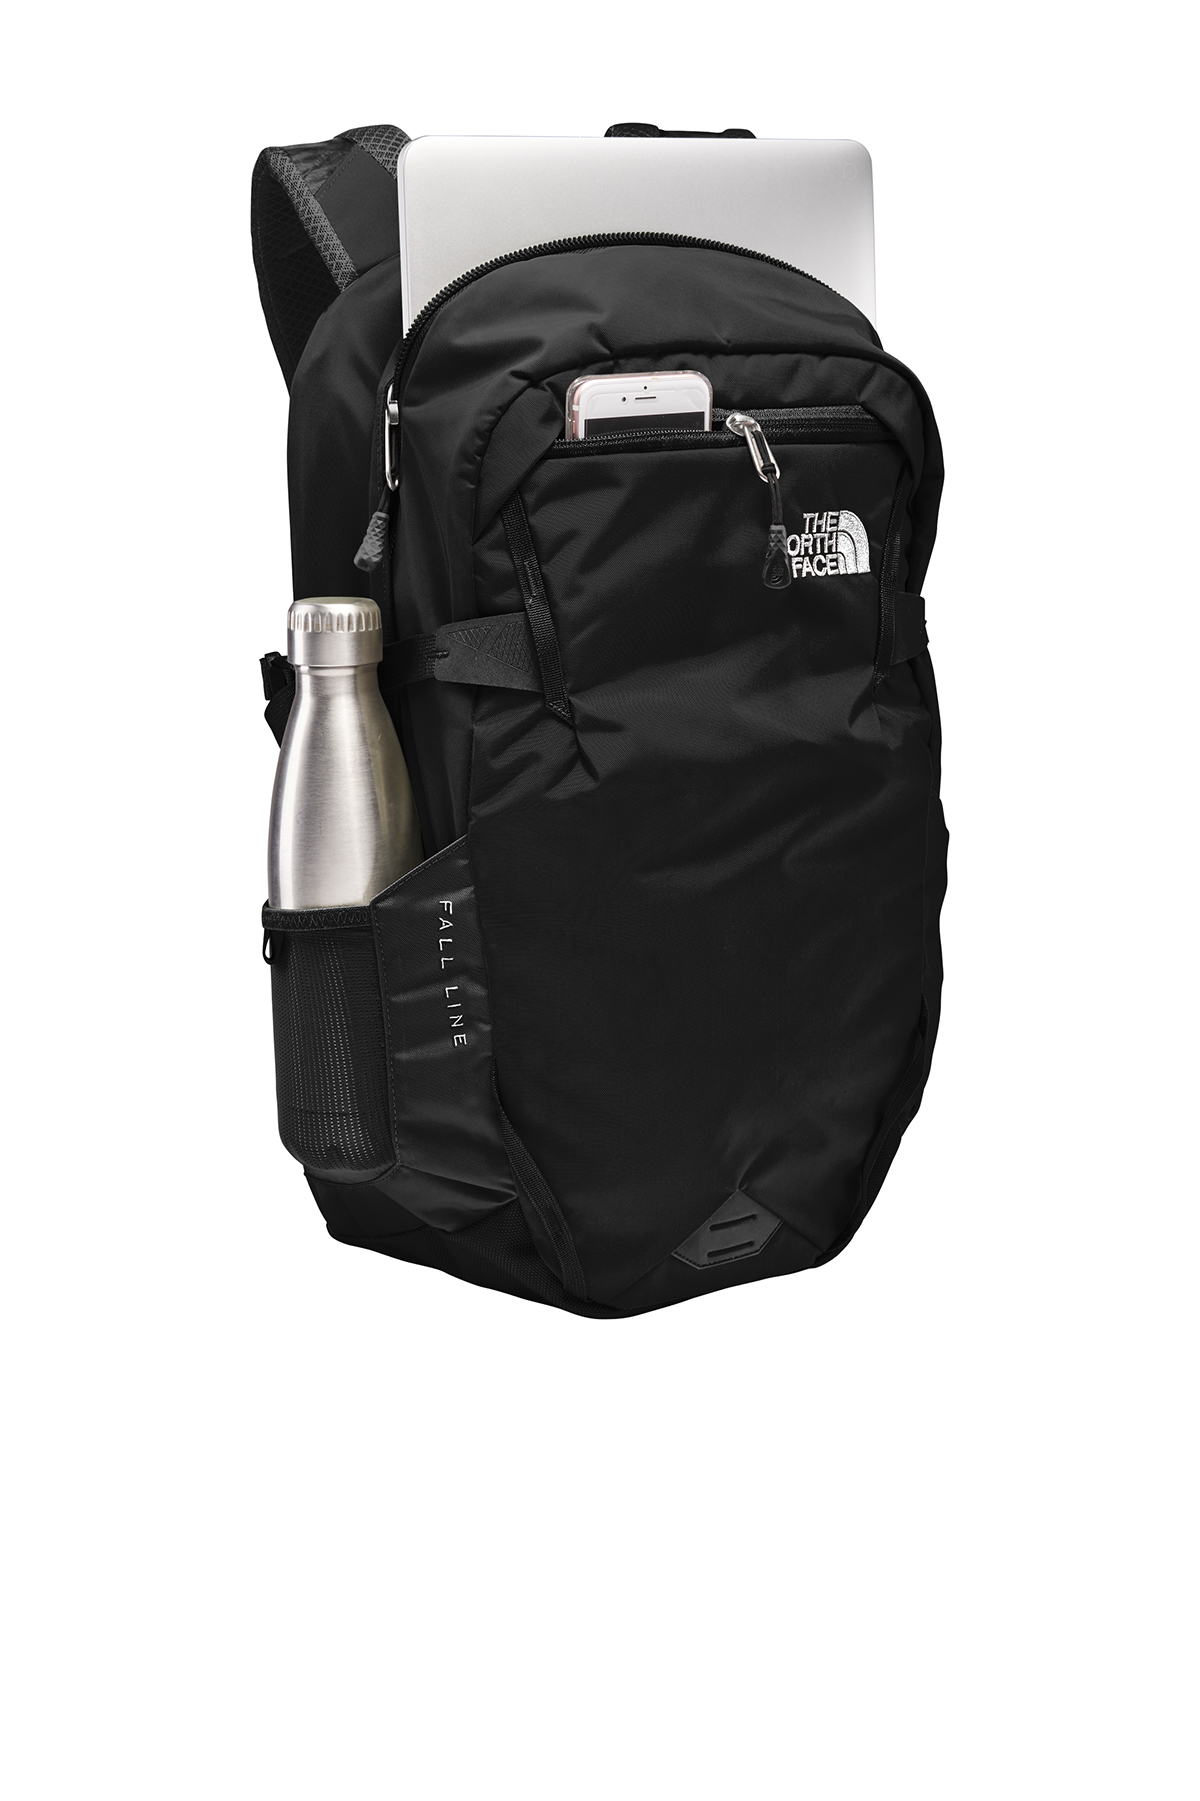 The North Face Fall Line Backpack | Product | SanMar